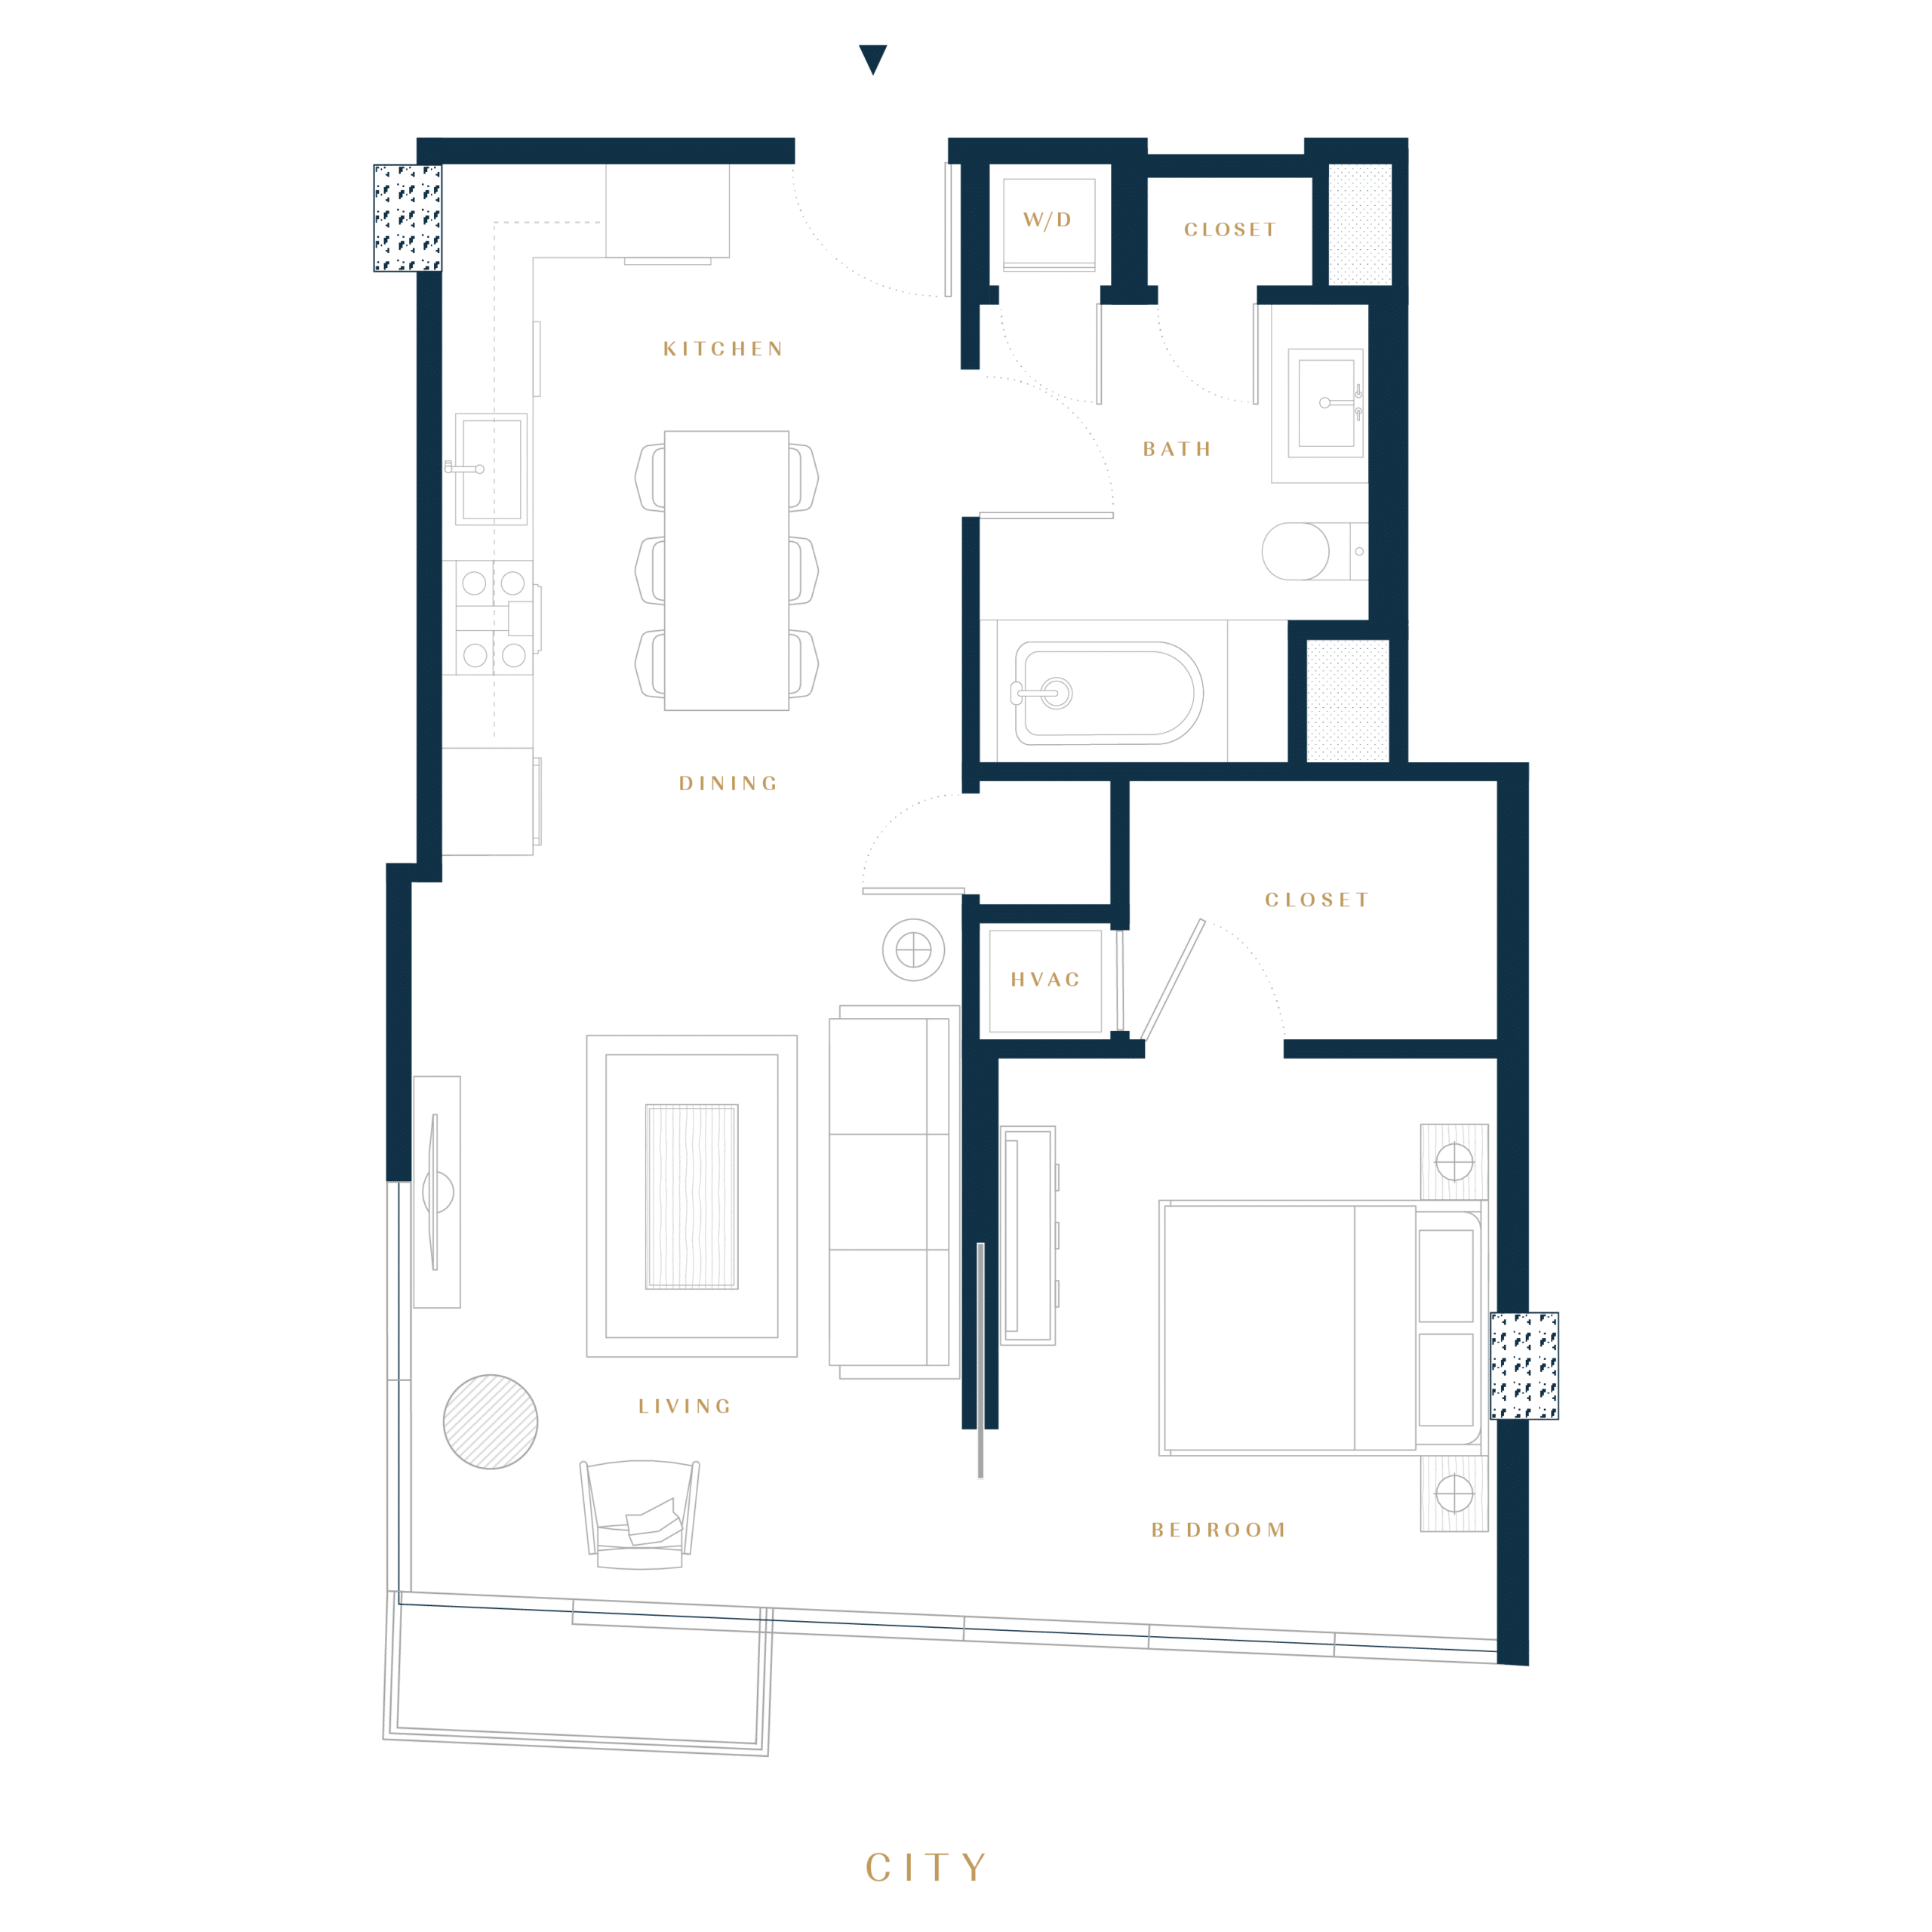 Residence 1Dluxury condo floor plan in San Francisco Dogpatch